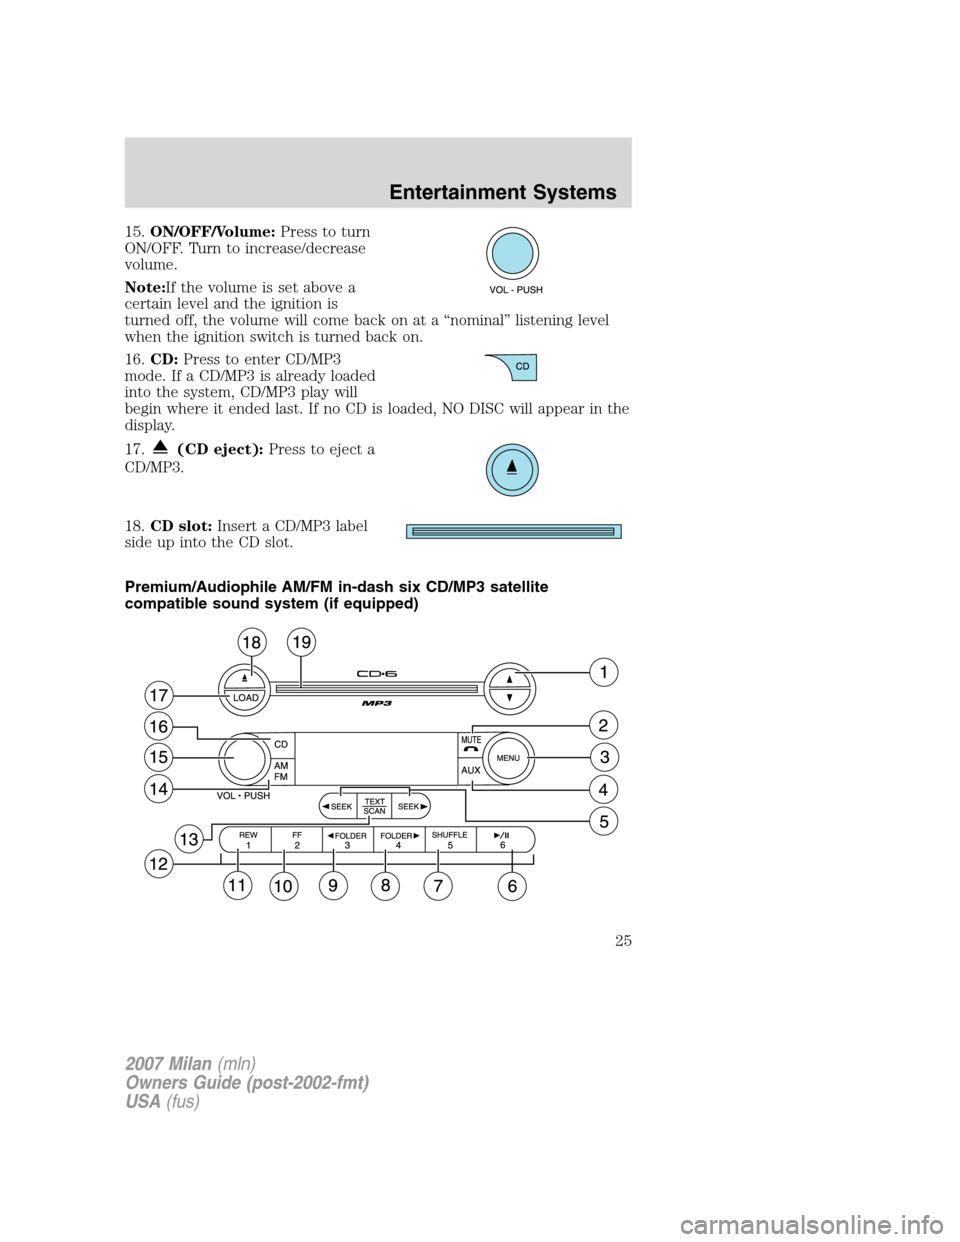 Mercury Milan 2007  s Owners Guide 15.ON/OFF/Volume:Press to turn
ON/OFF. Turn to increase/decrease
volume.
Note:If the volume is set above a
certain level and the ignition is
turned off, the volume will come back on at a “nominal”